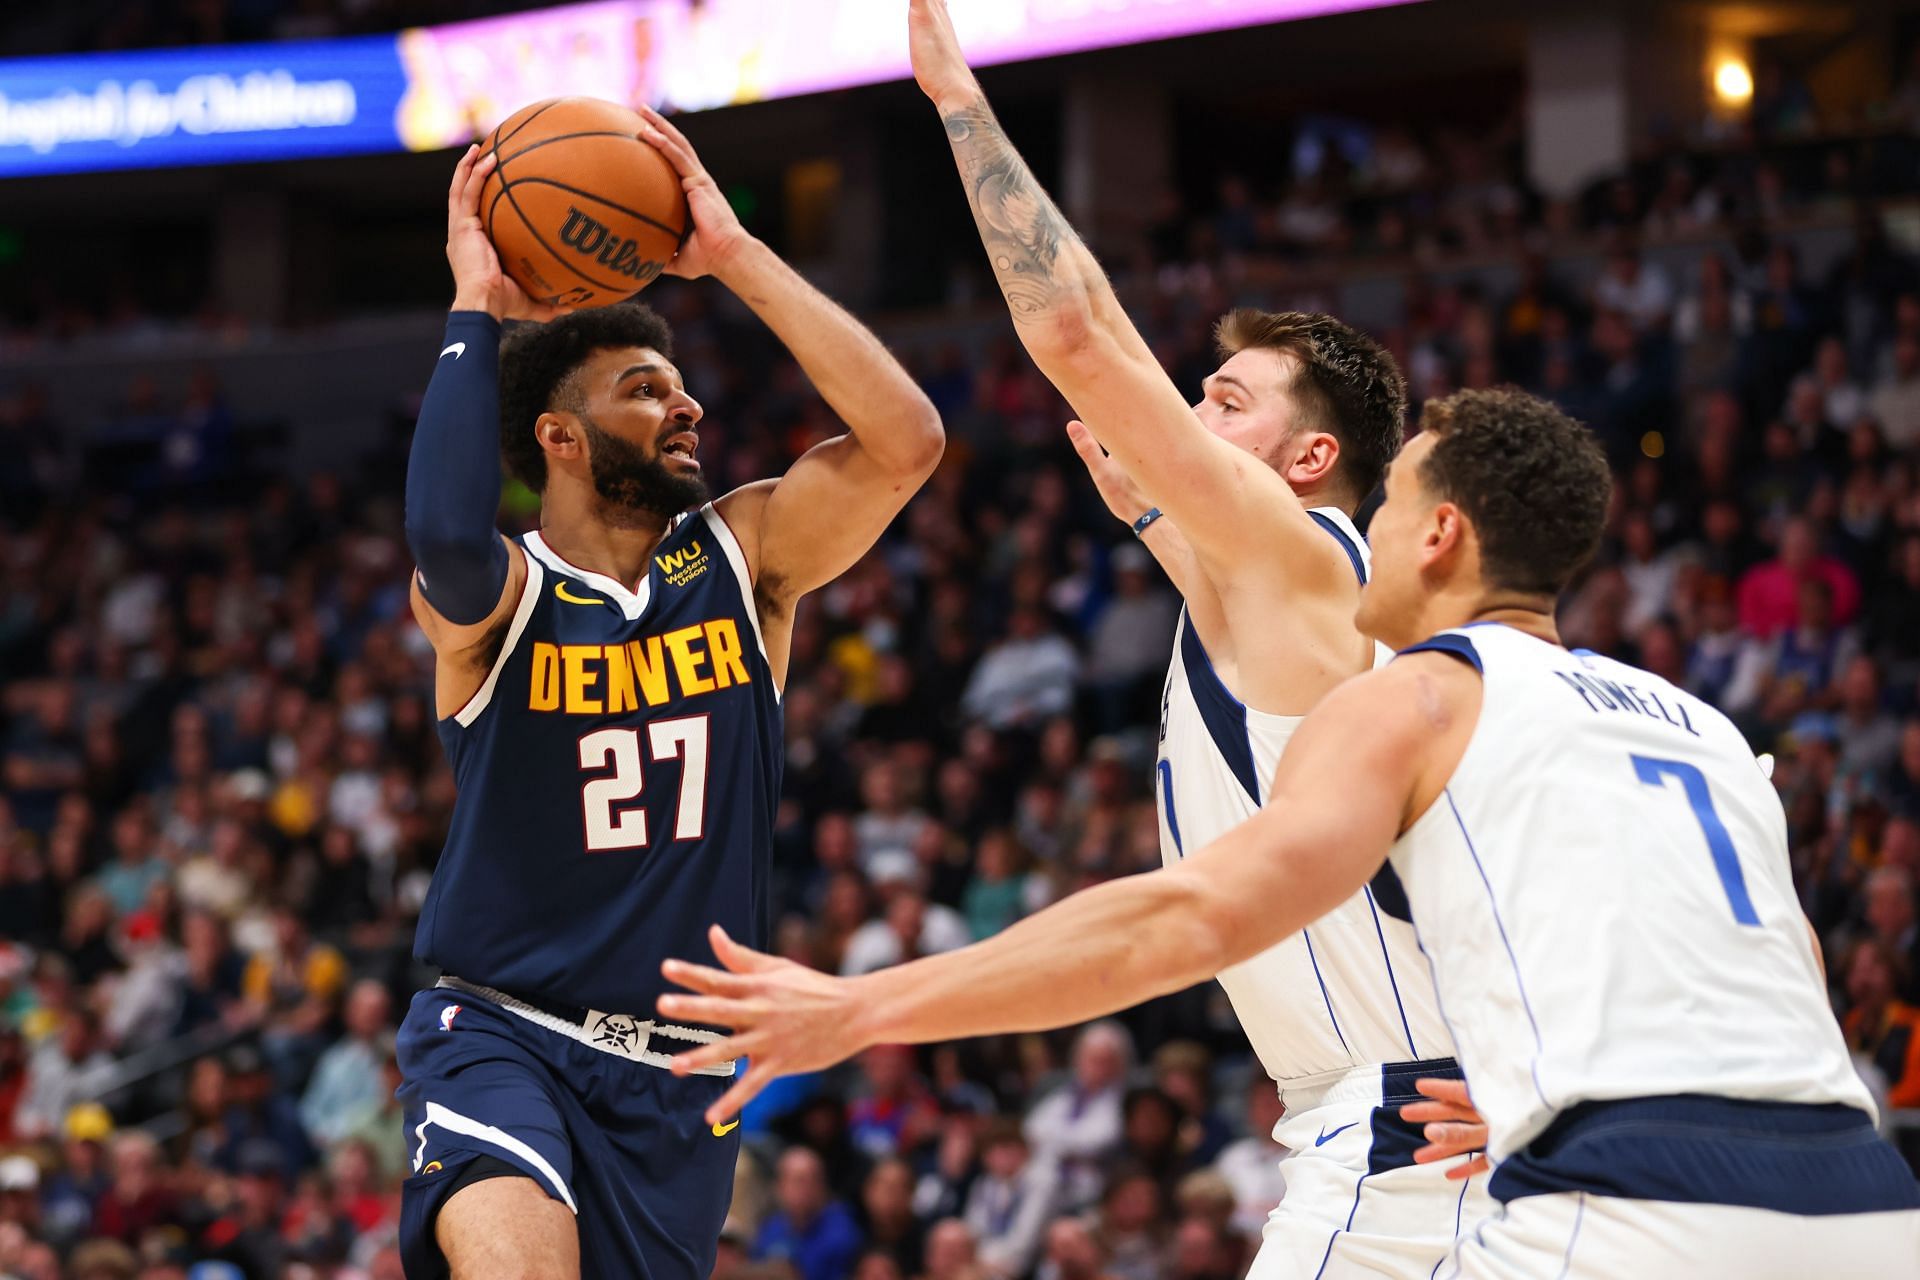 Jamal Murray is likely to play tonight for the Denver Nuggets